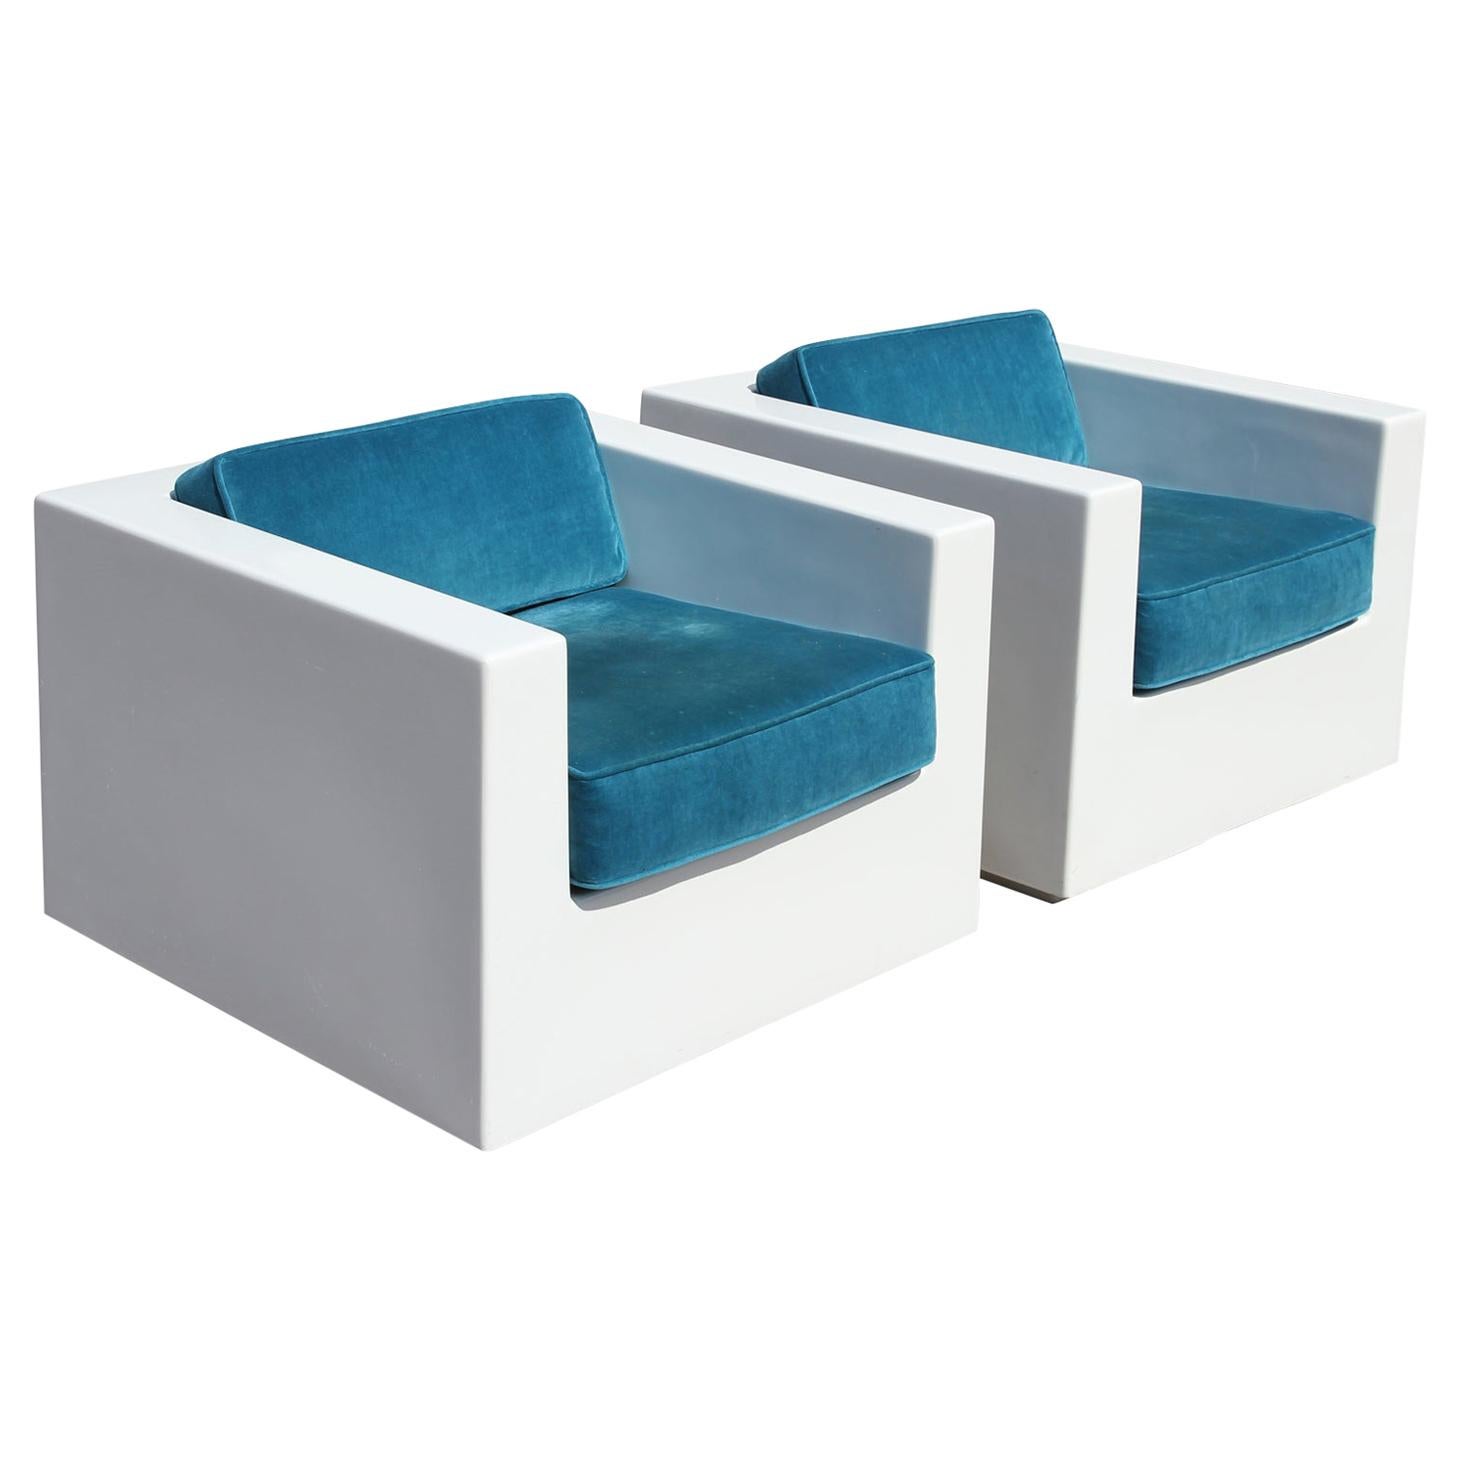 Pair of White Modern Cube Fiberglass Armchairs with Teal Velvet Seats